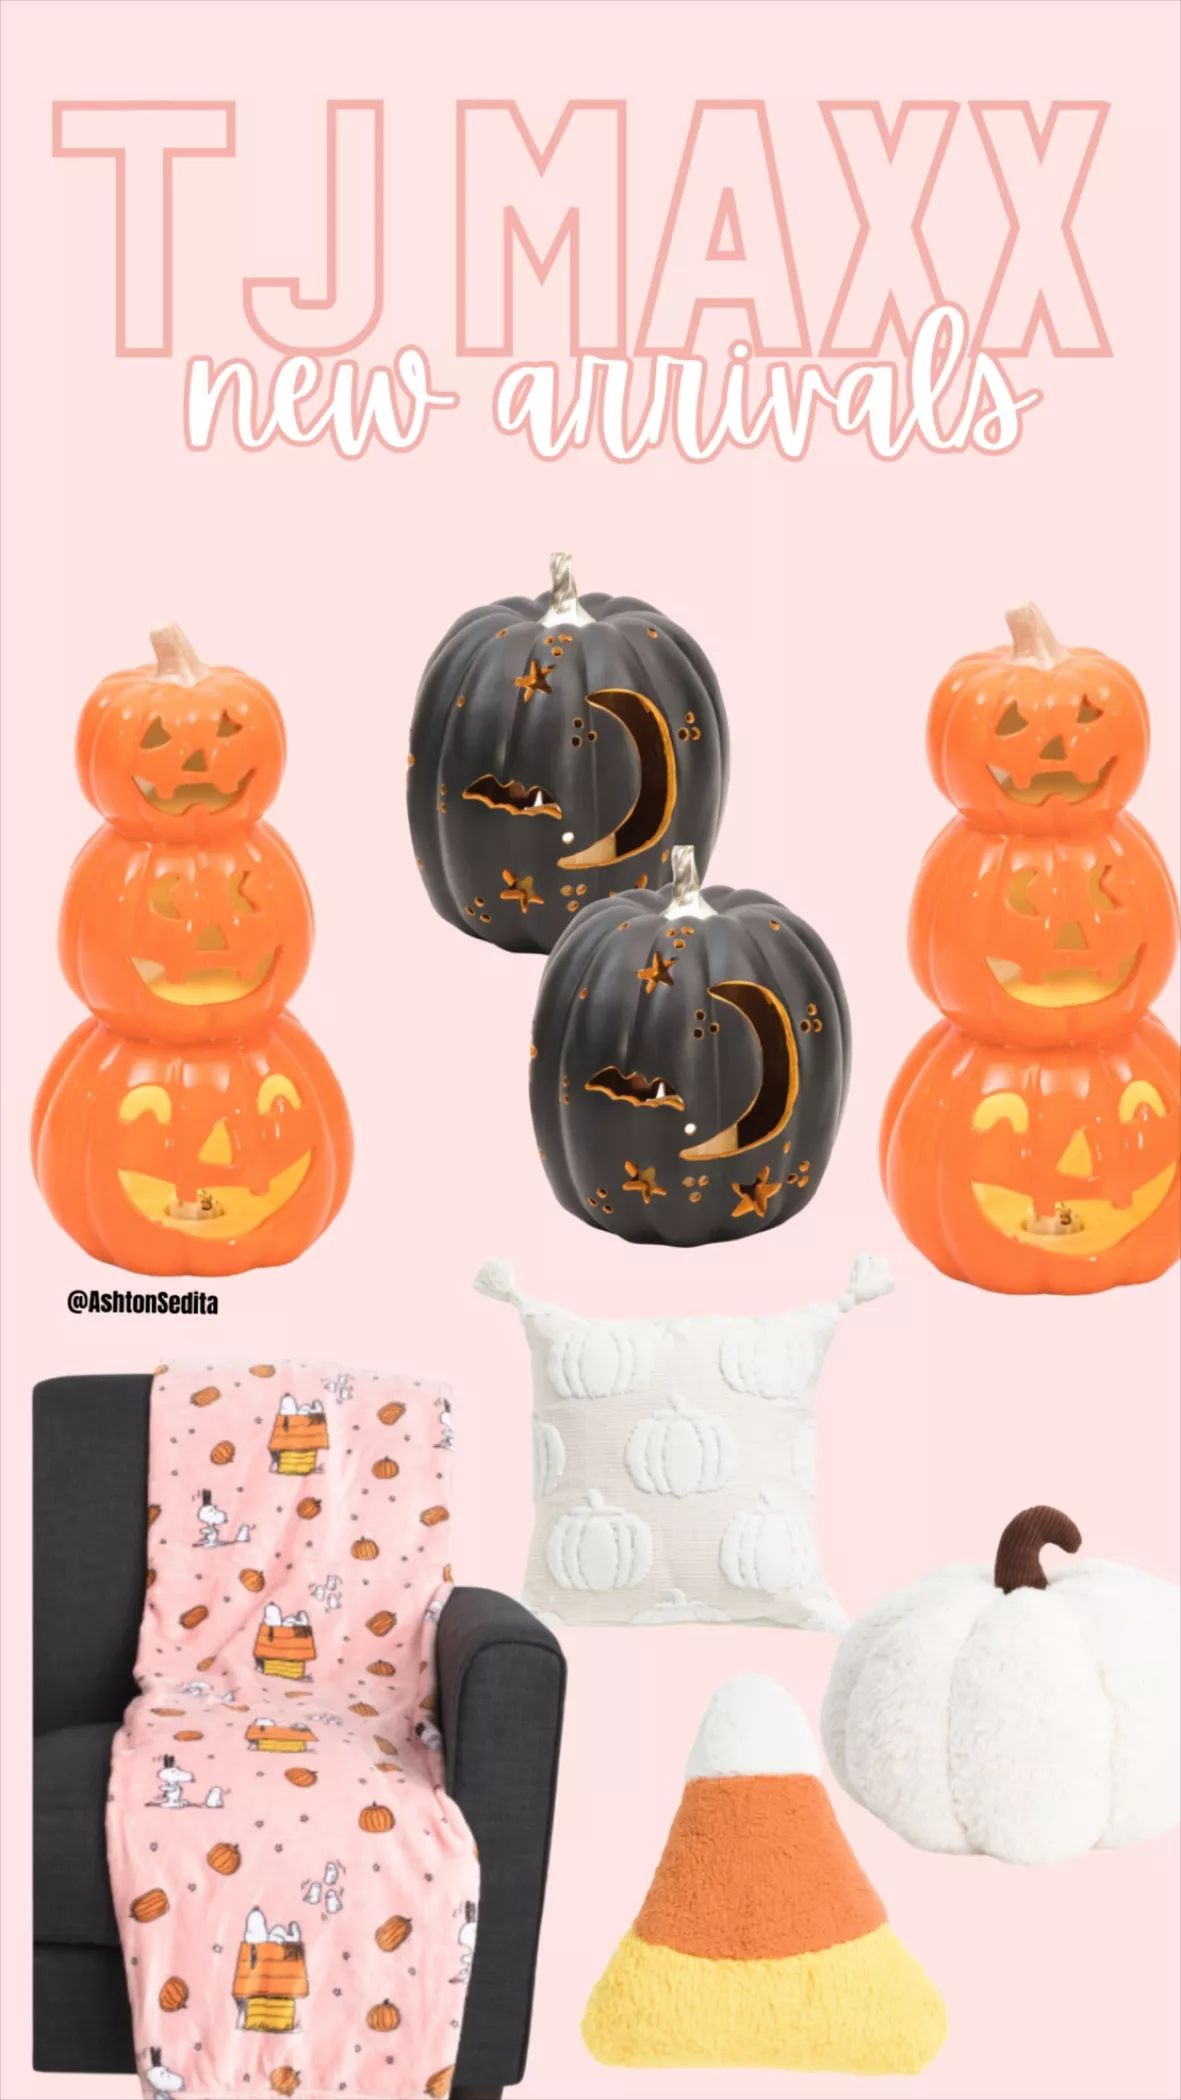 TJ Maxx Holiday Decor now in stores! Halloween cuteness!